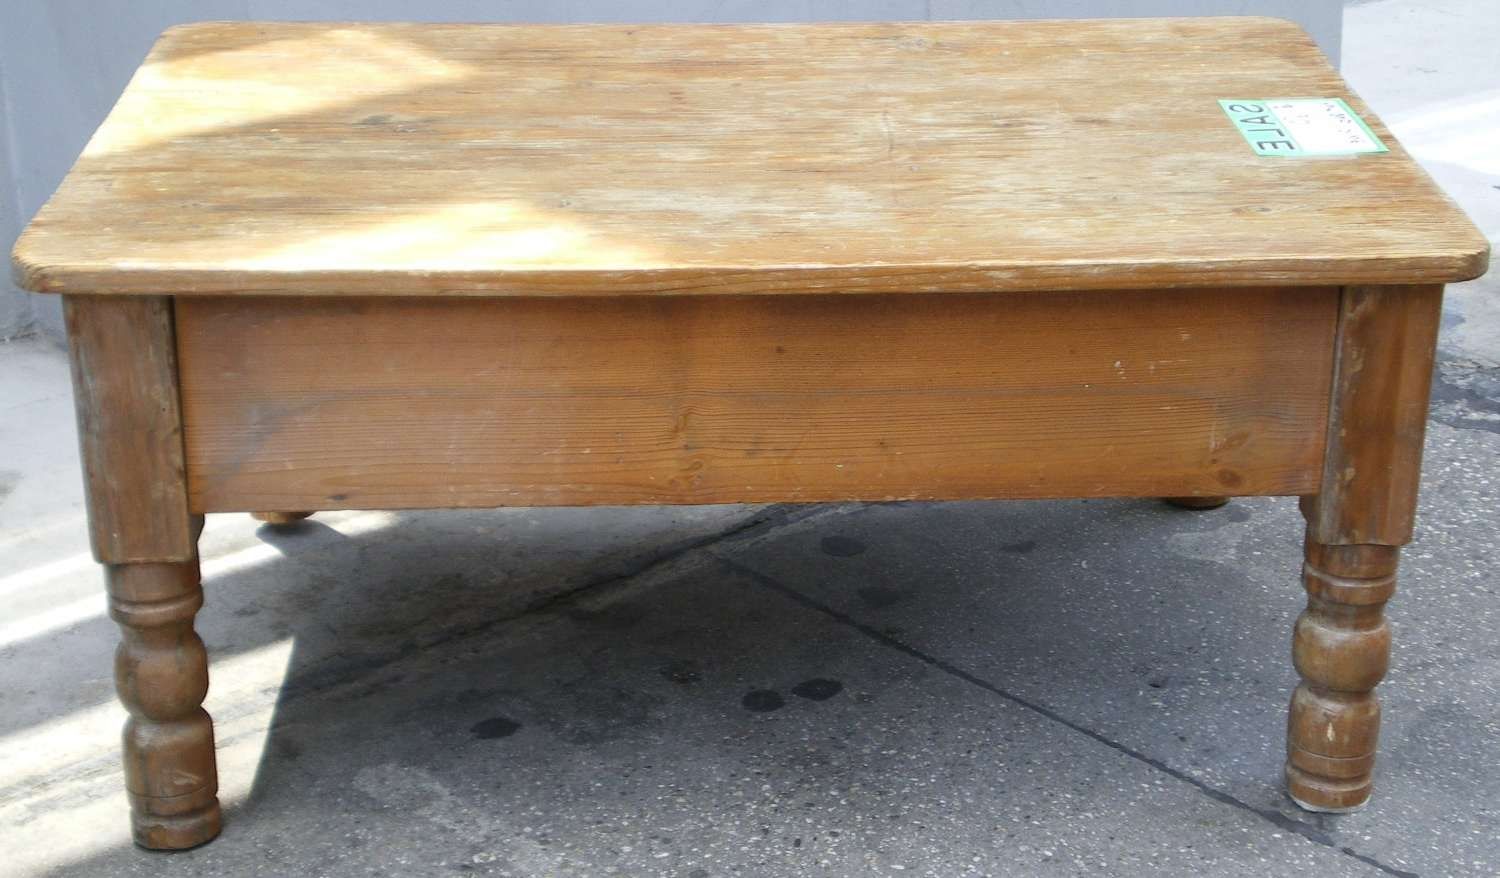 Antique Pine Coffee Table / Coffee Tables / Thippo With Regard To Most Recently Released Antique Pine Coffee Tables (Gallery 4 of 20)